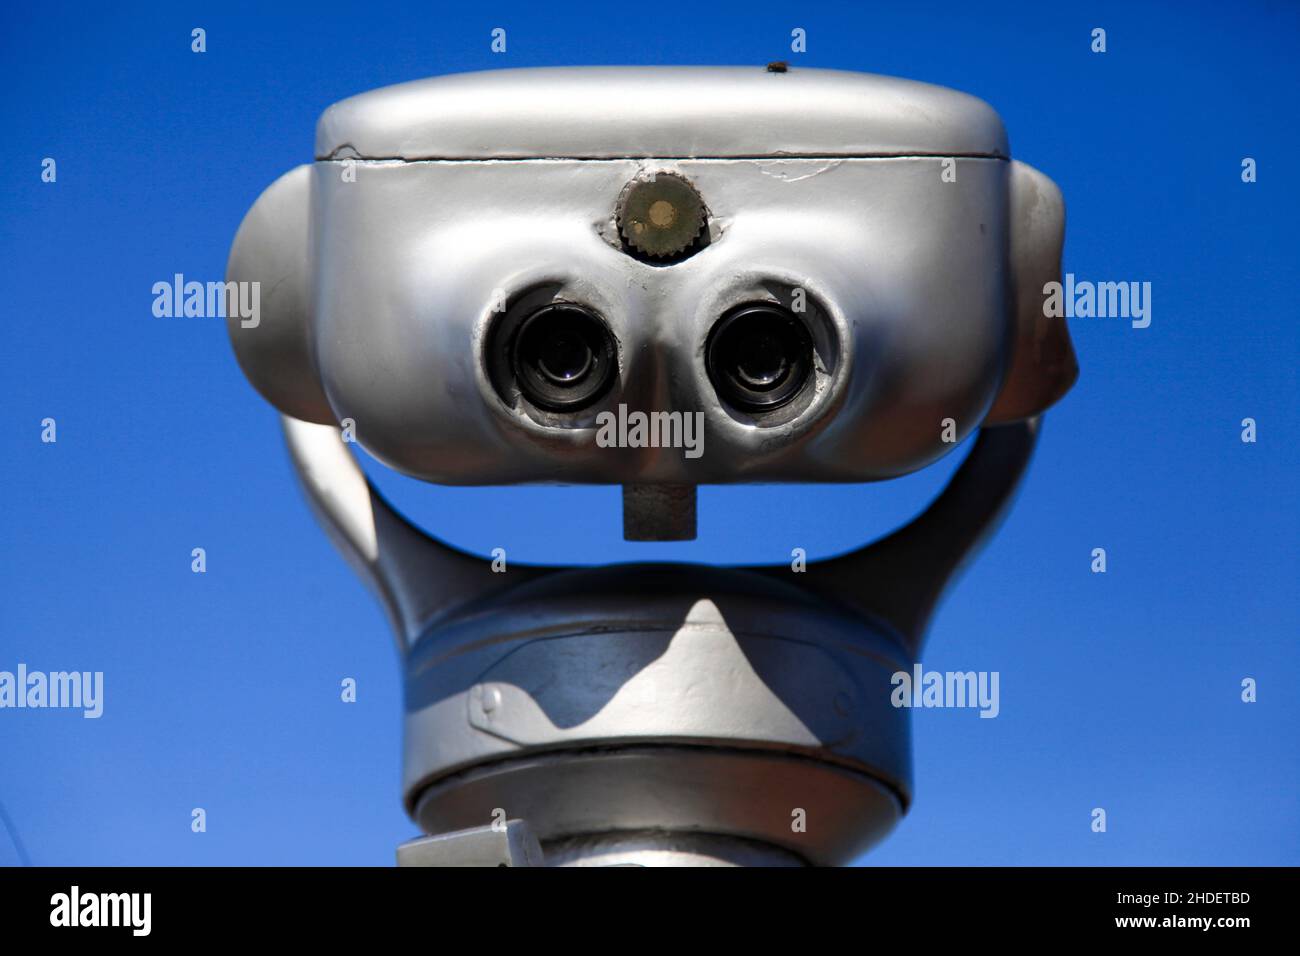 coin operated Viewing telescope aimed at a blue sky Stock Photo